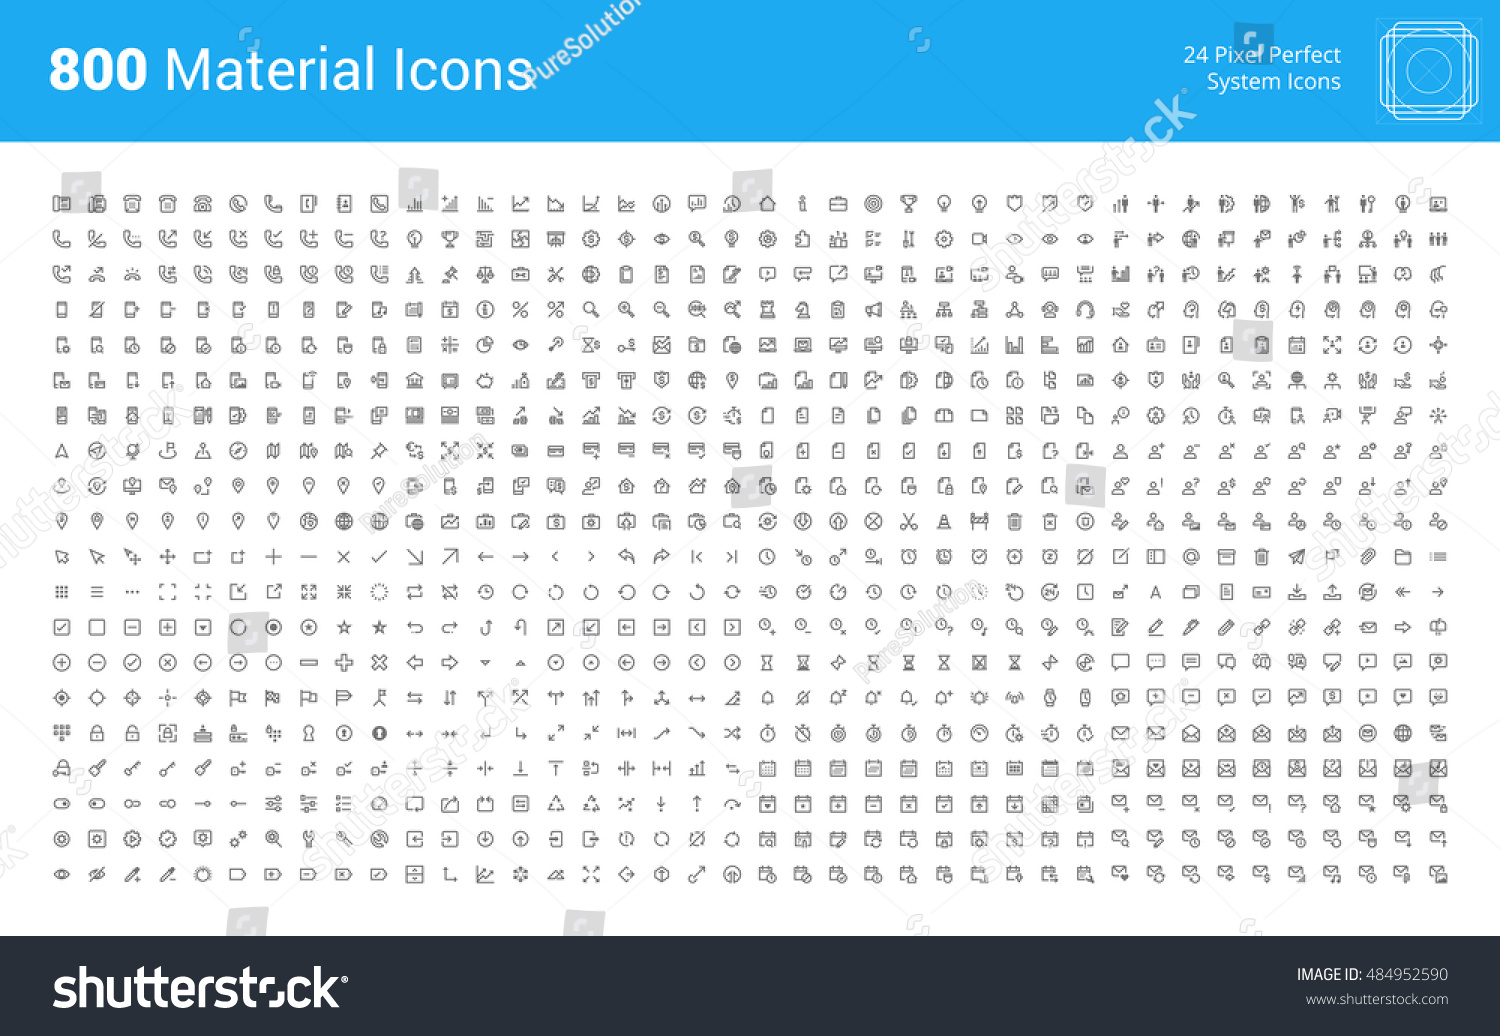 Material design pixel perfect icons set. Thin line icons for business, marketing, social media, UI and UX, finance and banking, navigation, mobile app, communication, action icons, management, seo.  #484952590